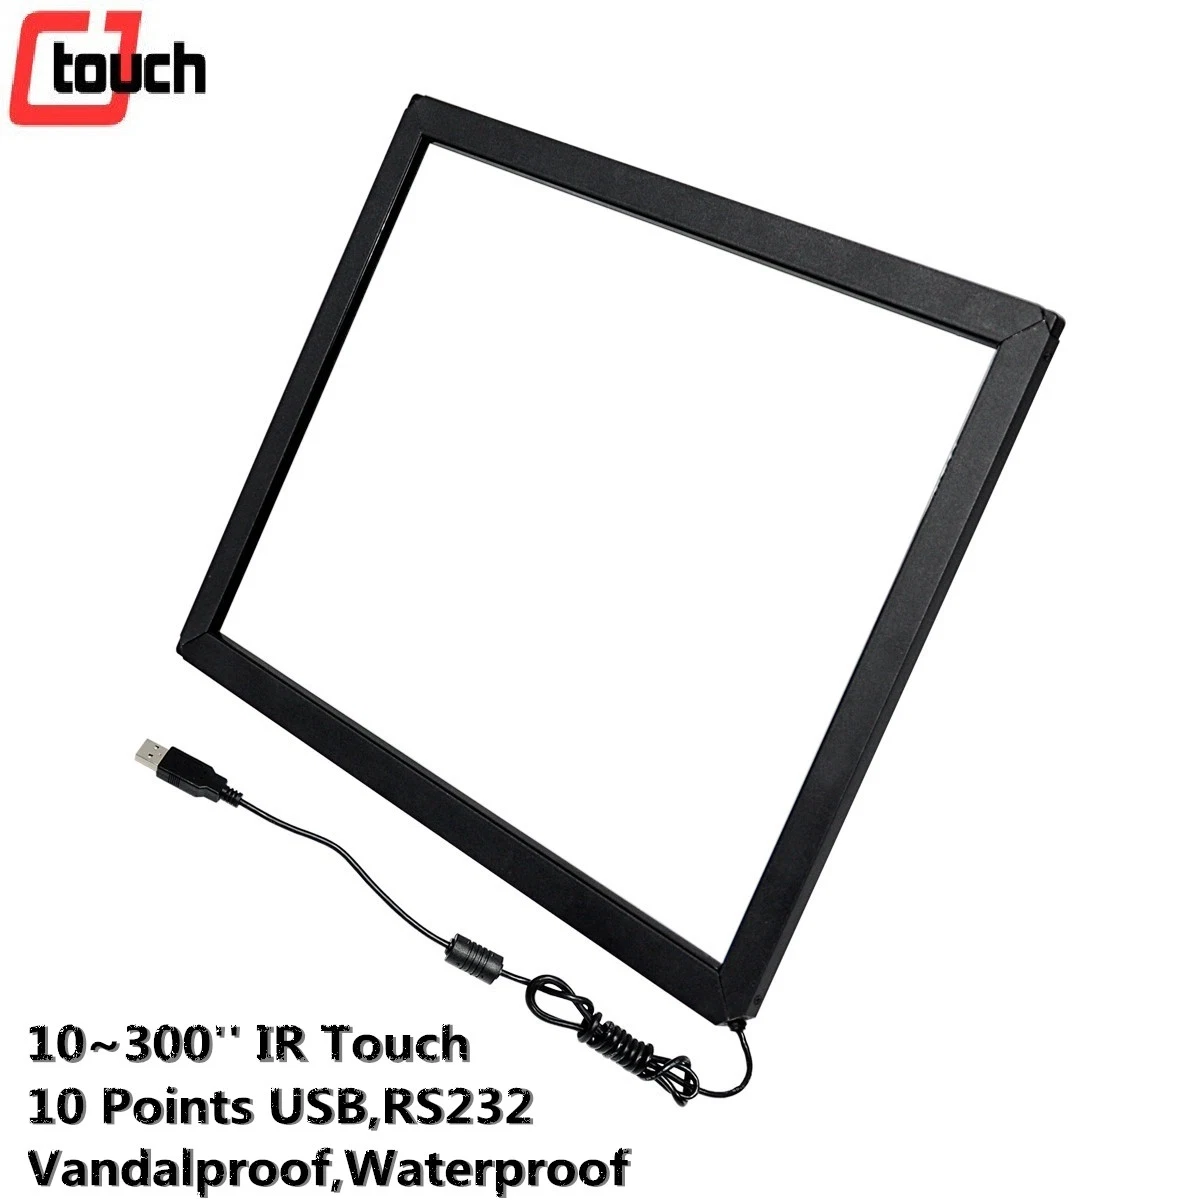 Cjtouch Infrared 17.3" IR Touch Screens LCD Screen Kit for Education Meeting Banking ATM Smart Android Multitouch USB